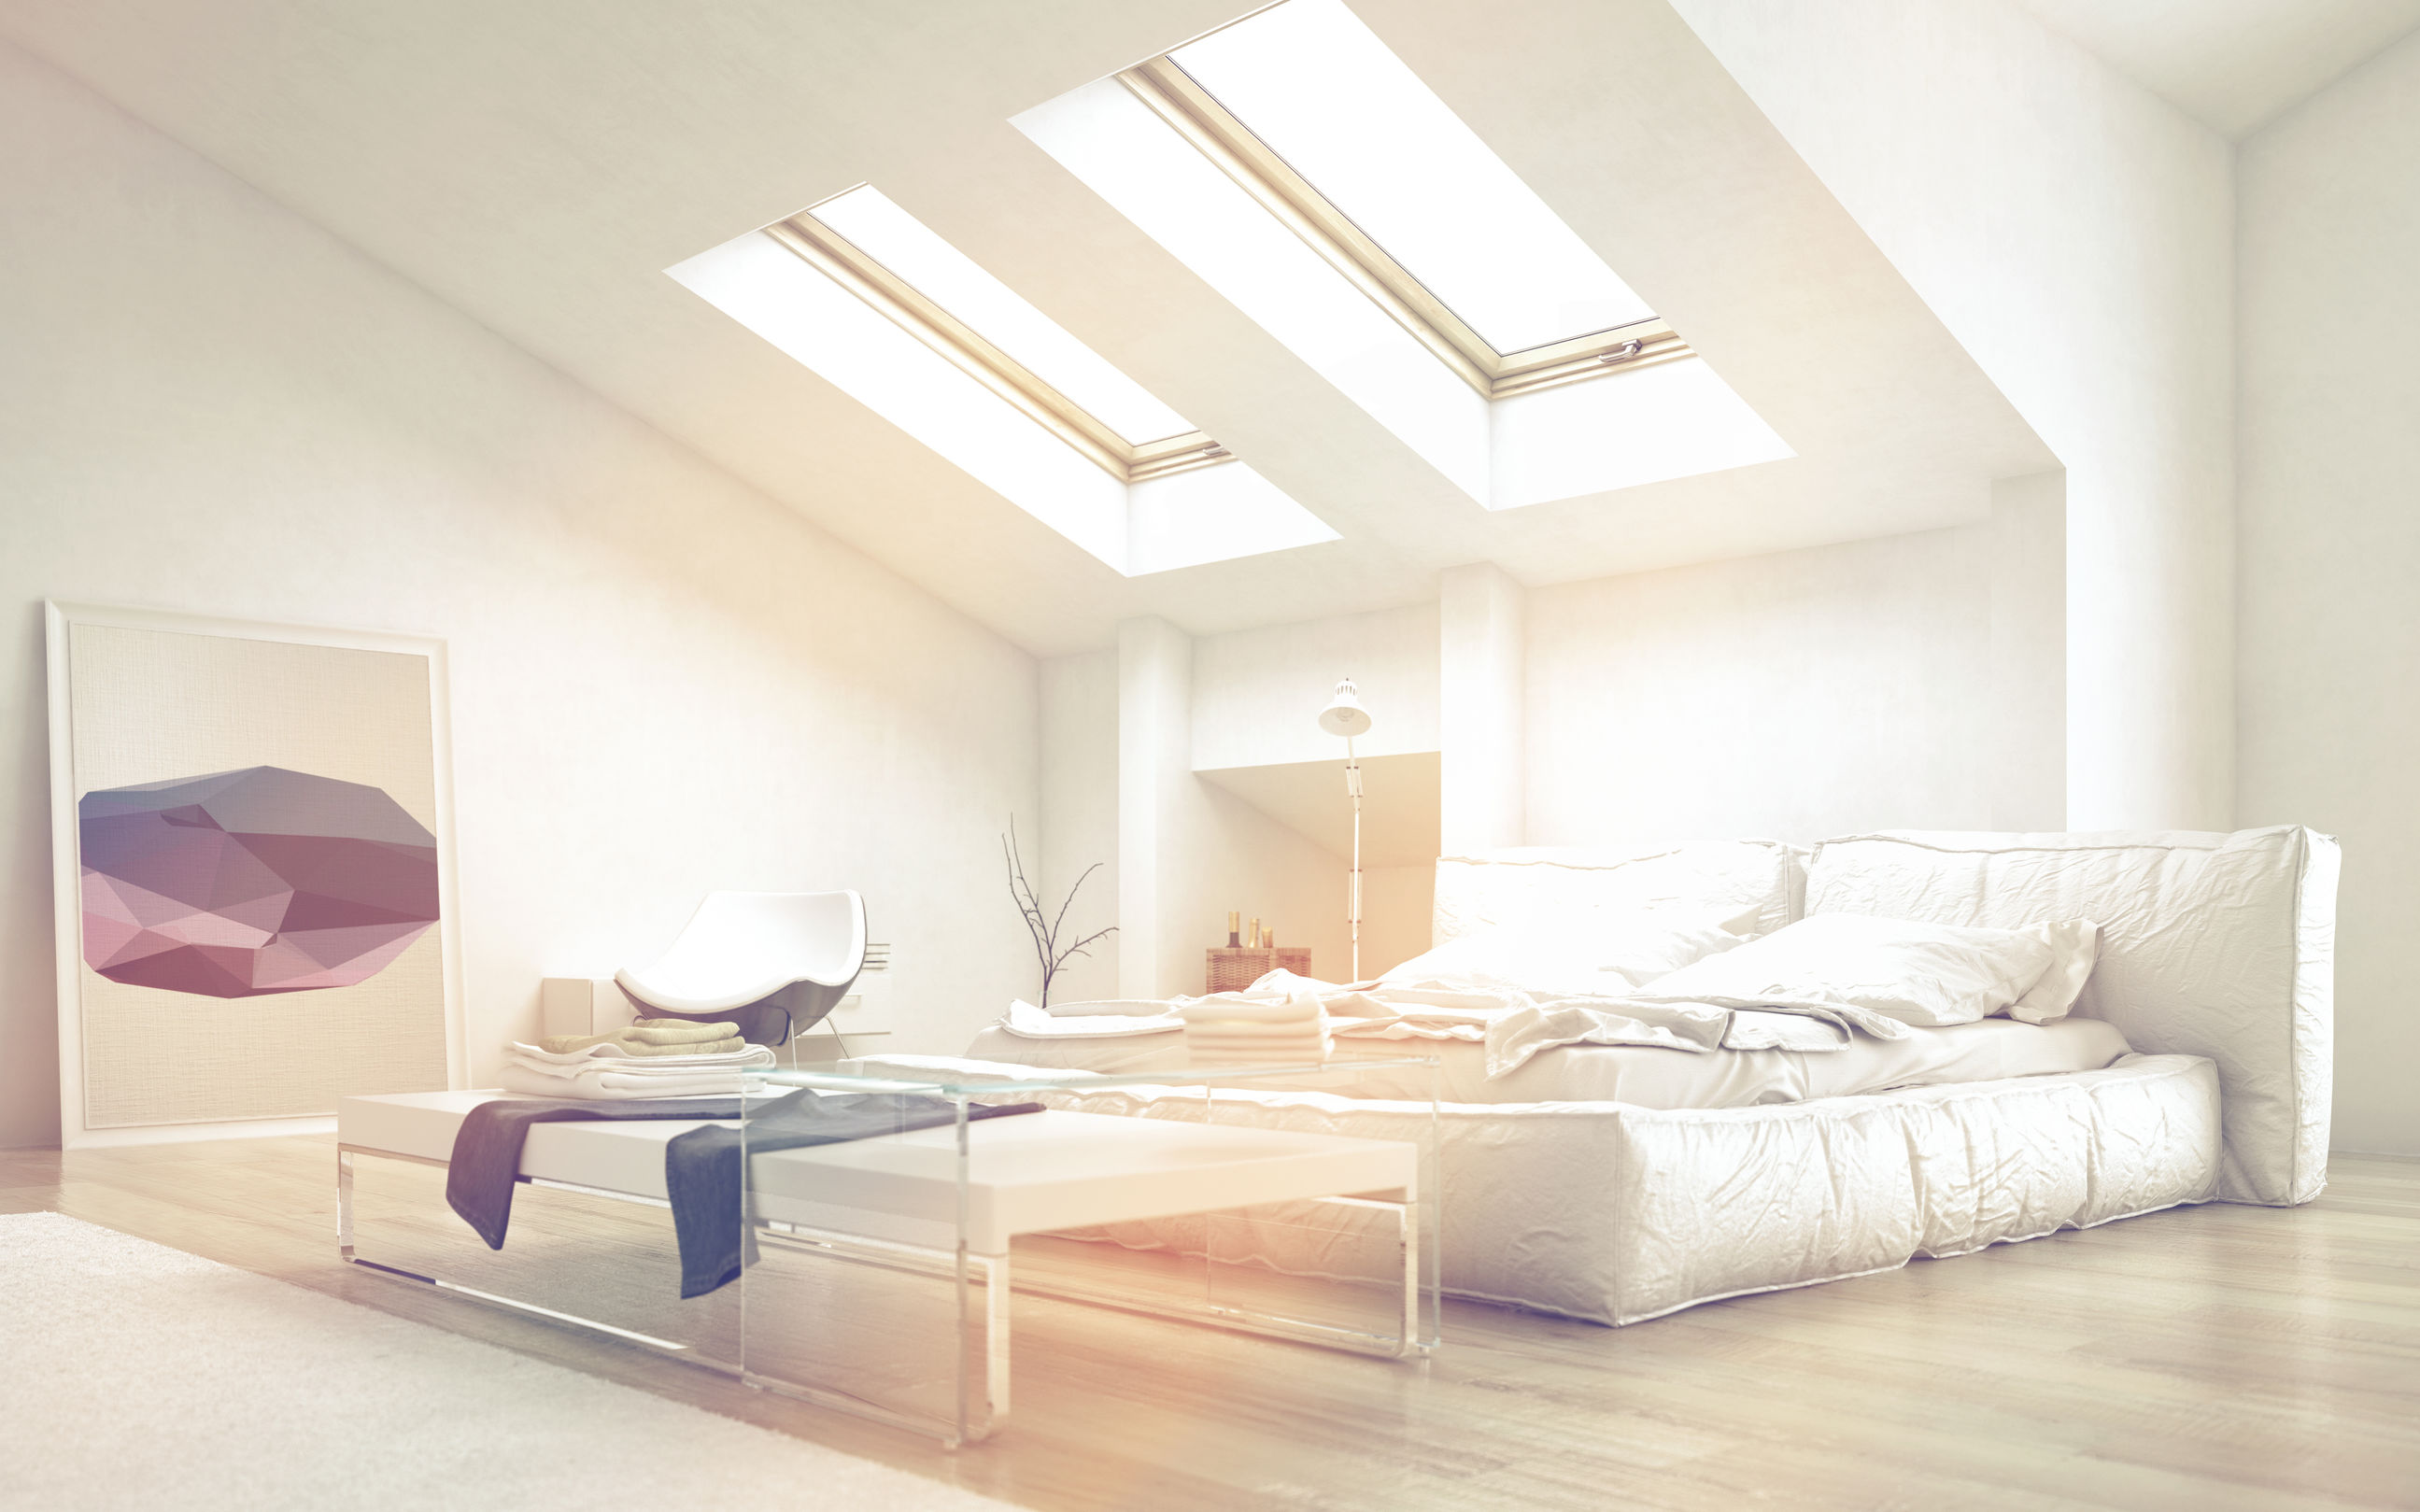 Featured Image for: Renovating a home? Add value with beautiful skylights!